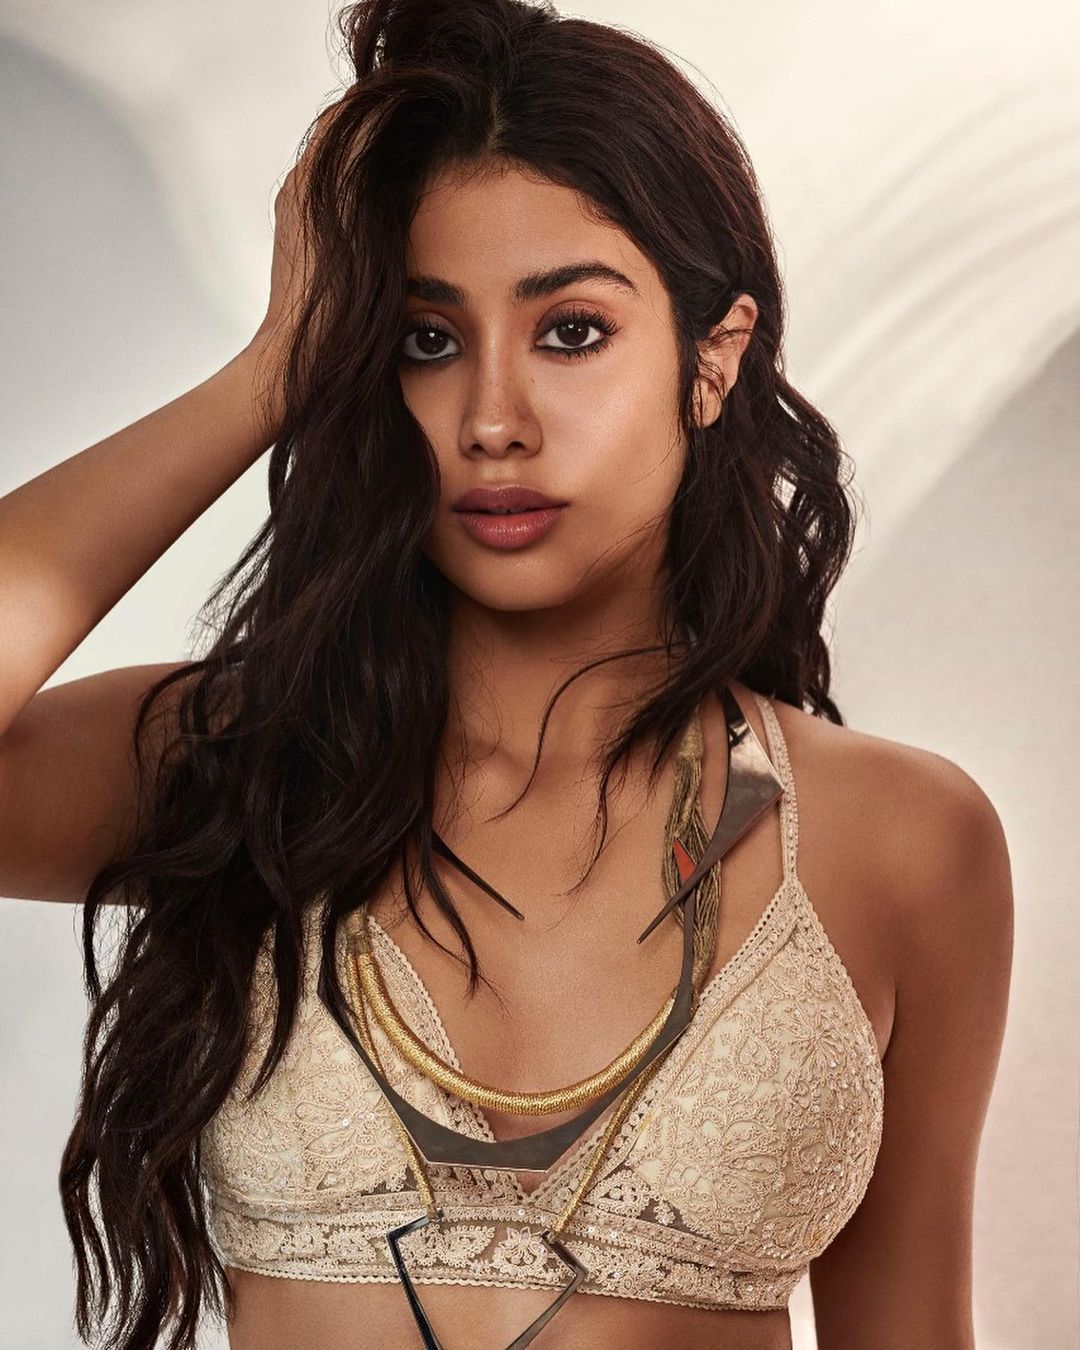  Janhvi Kapoor looks sensuous in the kohl-rimmed eyes and glossy lips. (Image: Instagram)